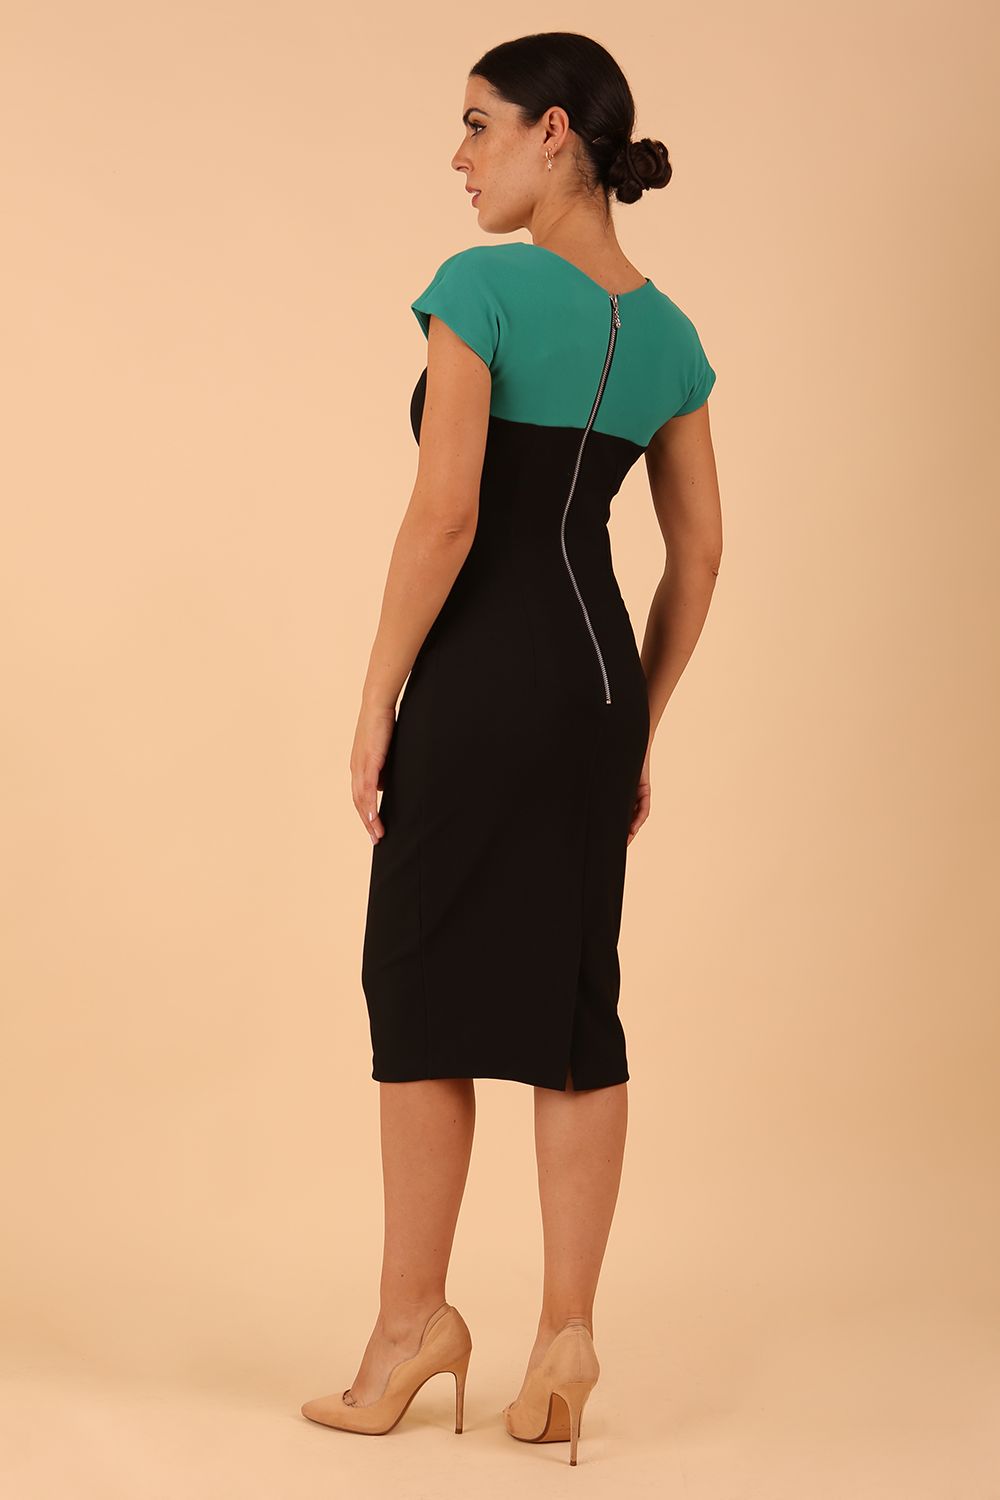 Model wearing the Diva Bryony Contrast dress with contrasting top and exposed zip at the back in black and emerald green back image